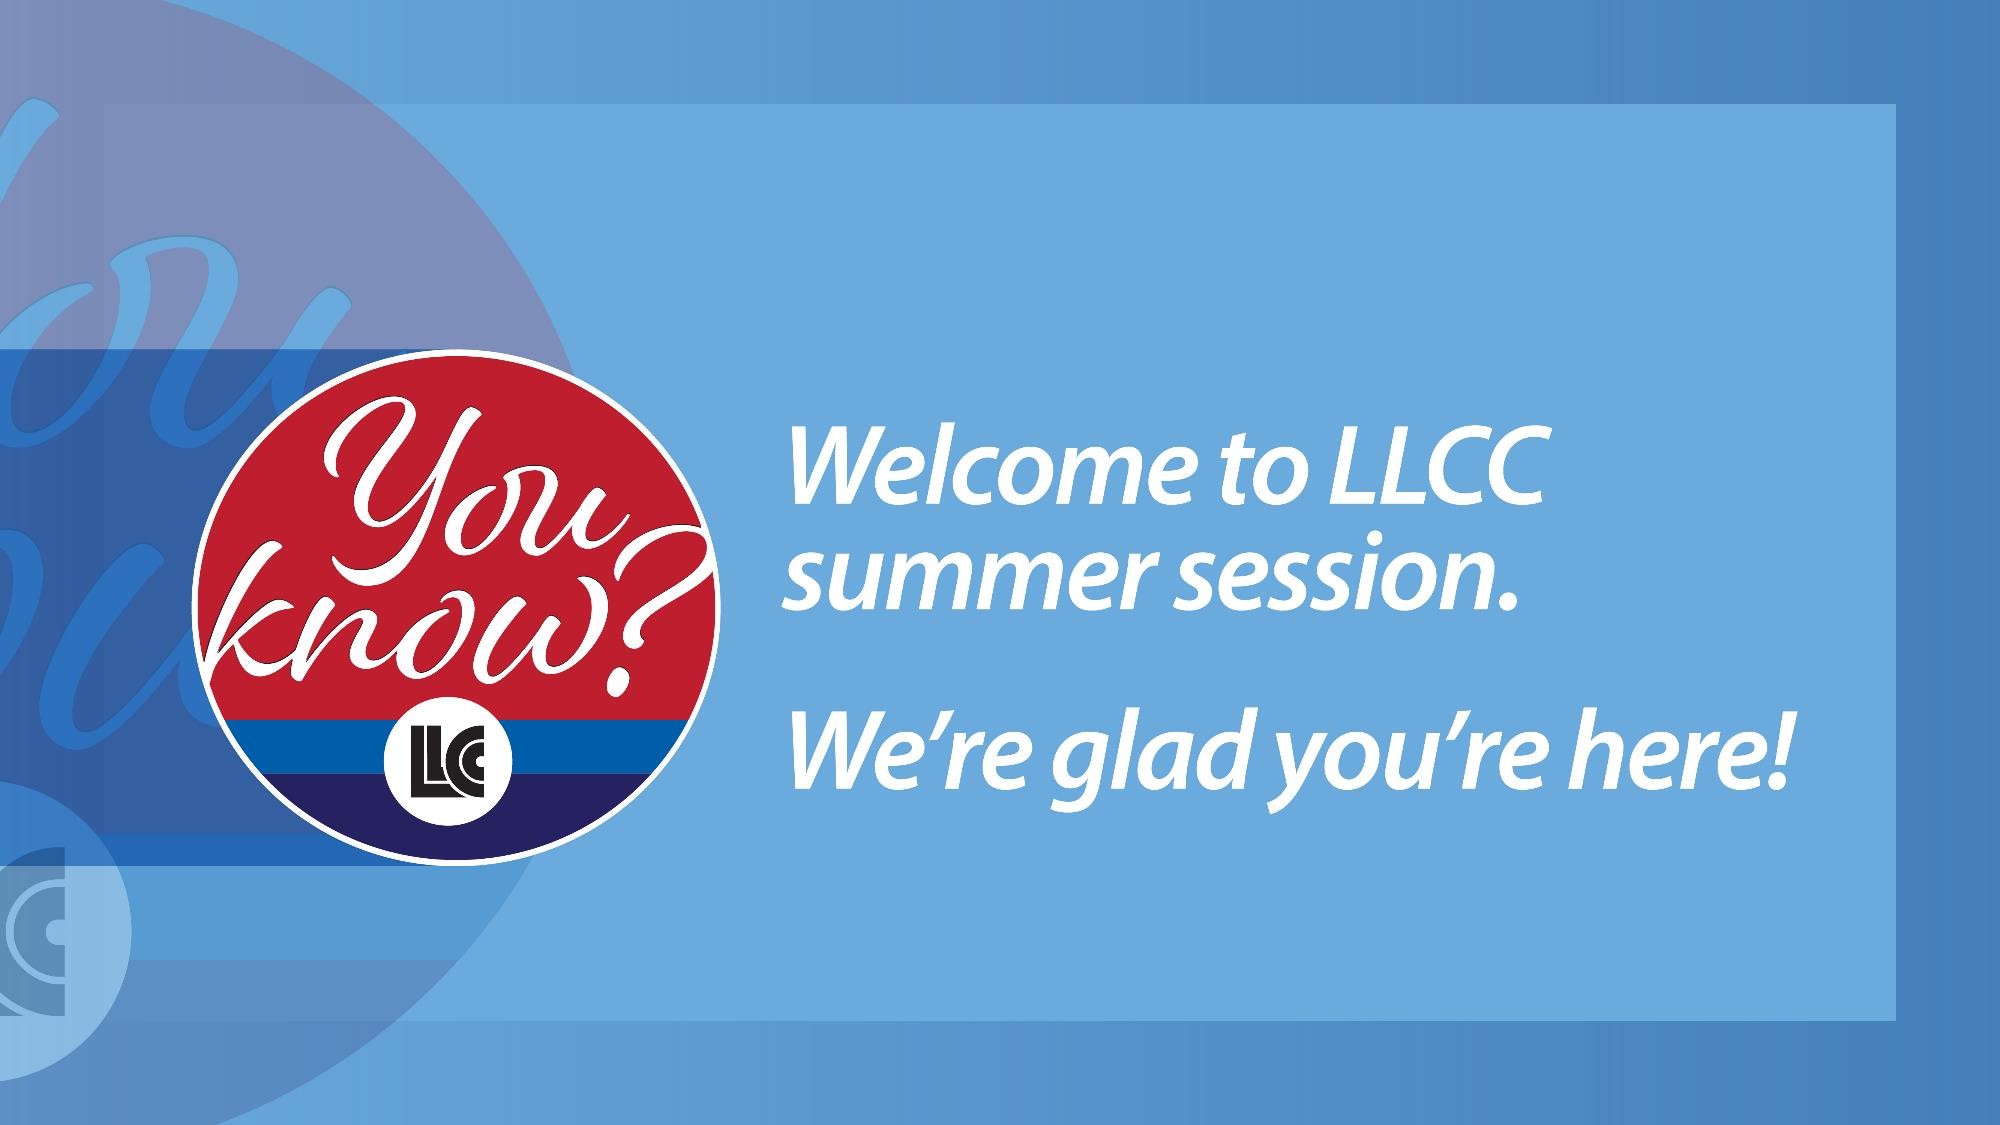 You know? Welcome to LLCC summer session. We're glad you're here! LLCC.